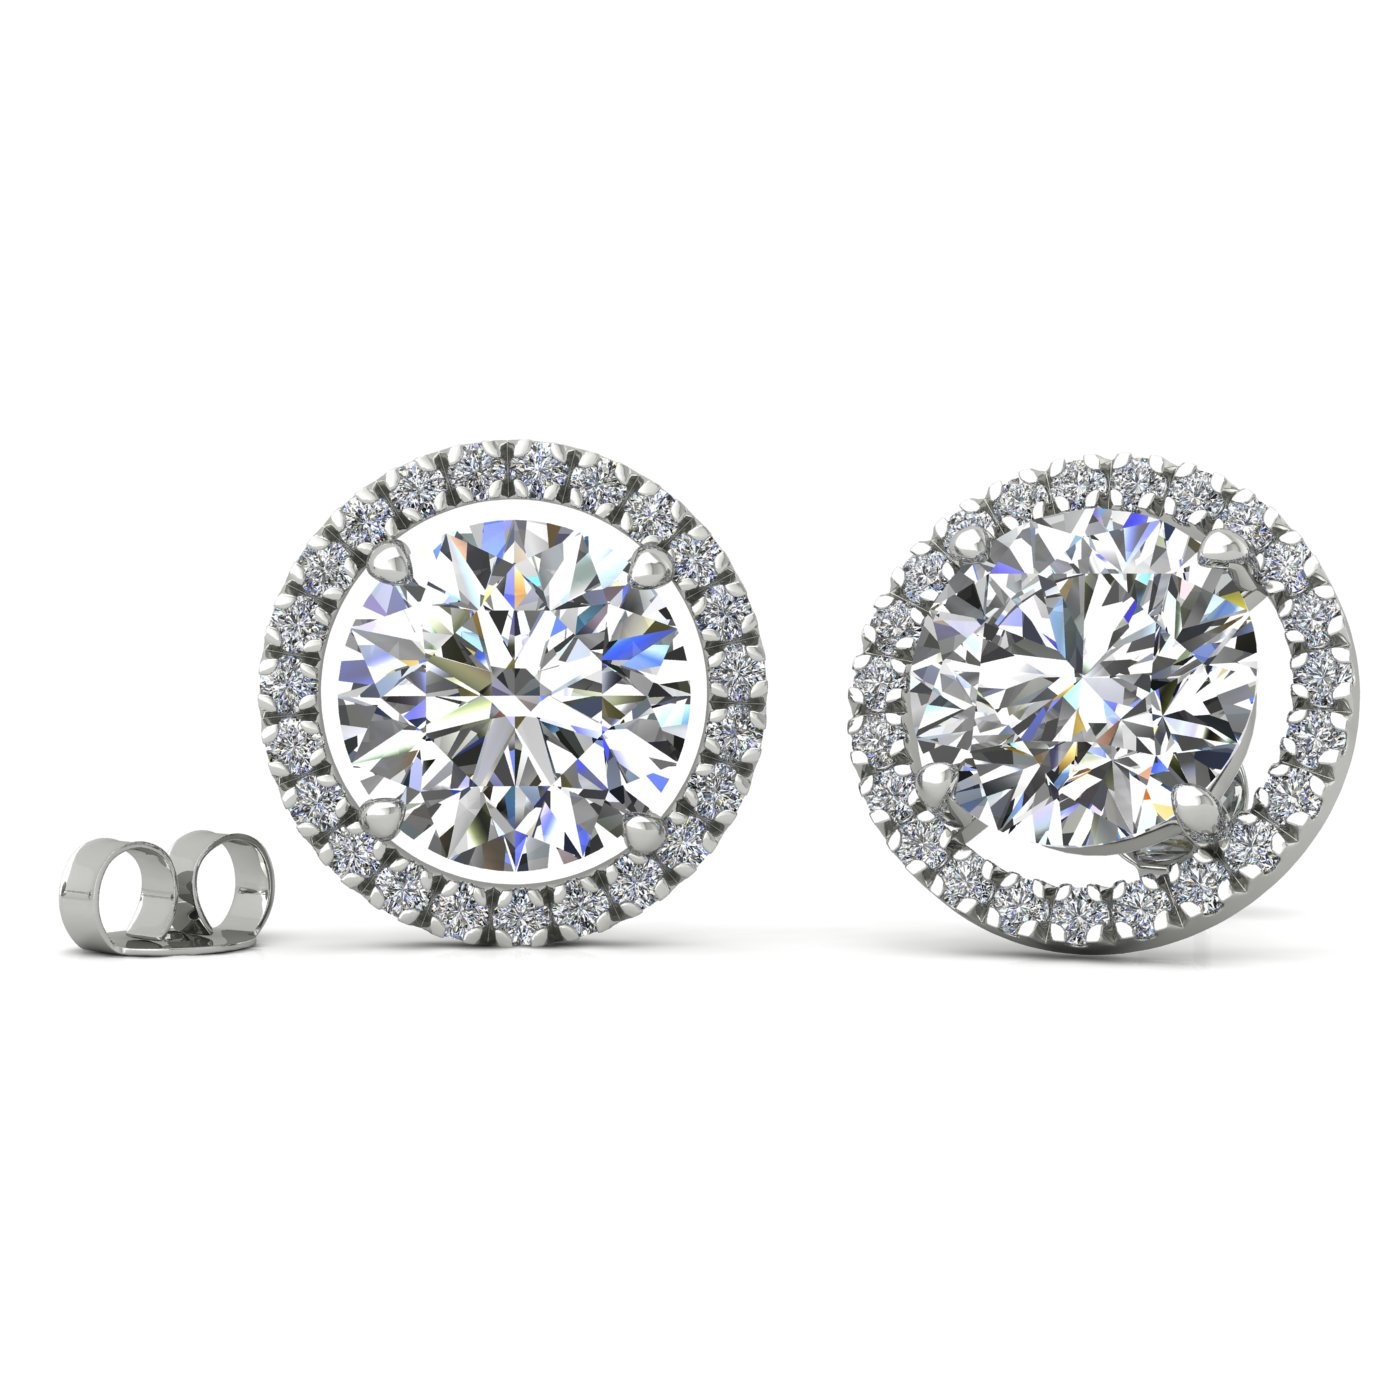 18k white gold  0,3 ct each (0,6 tcw) 4 prongs round brilliant cut halo diamond earring studs Photos & images